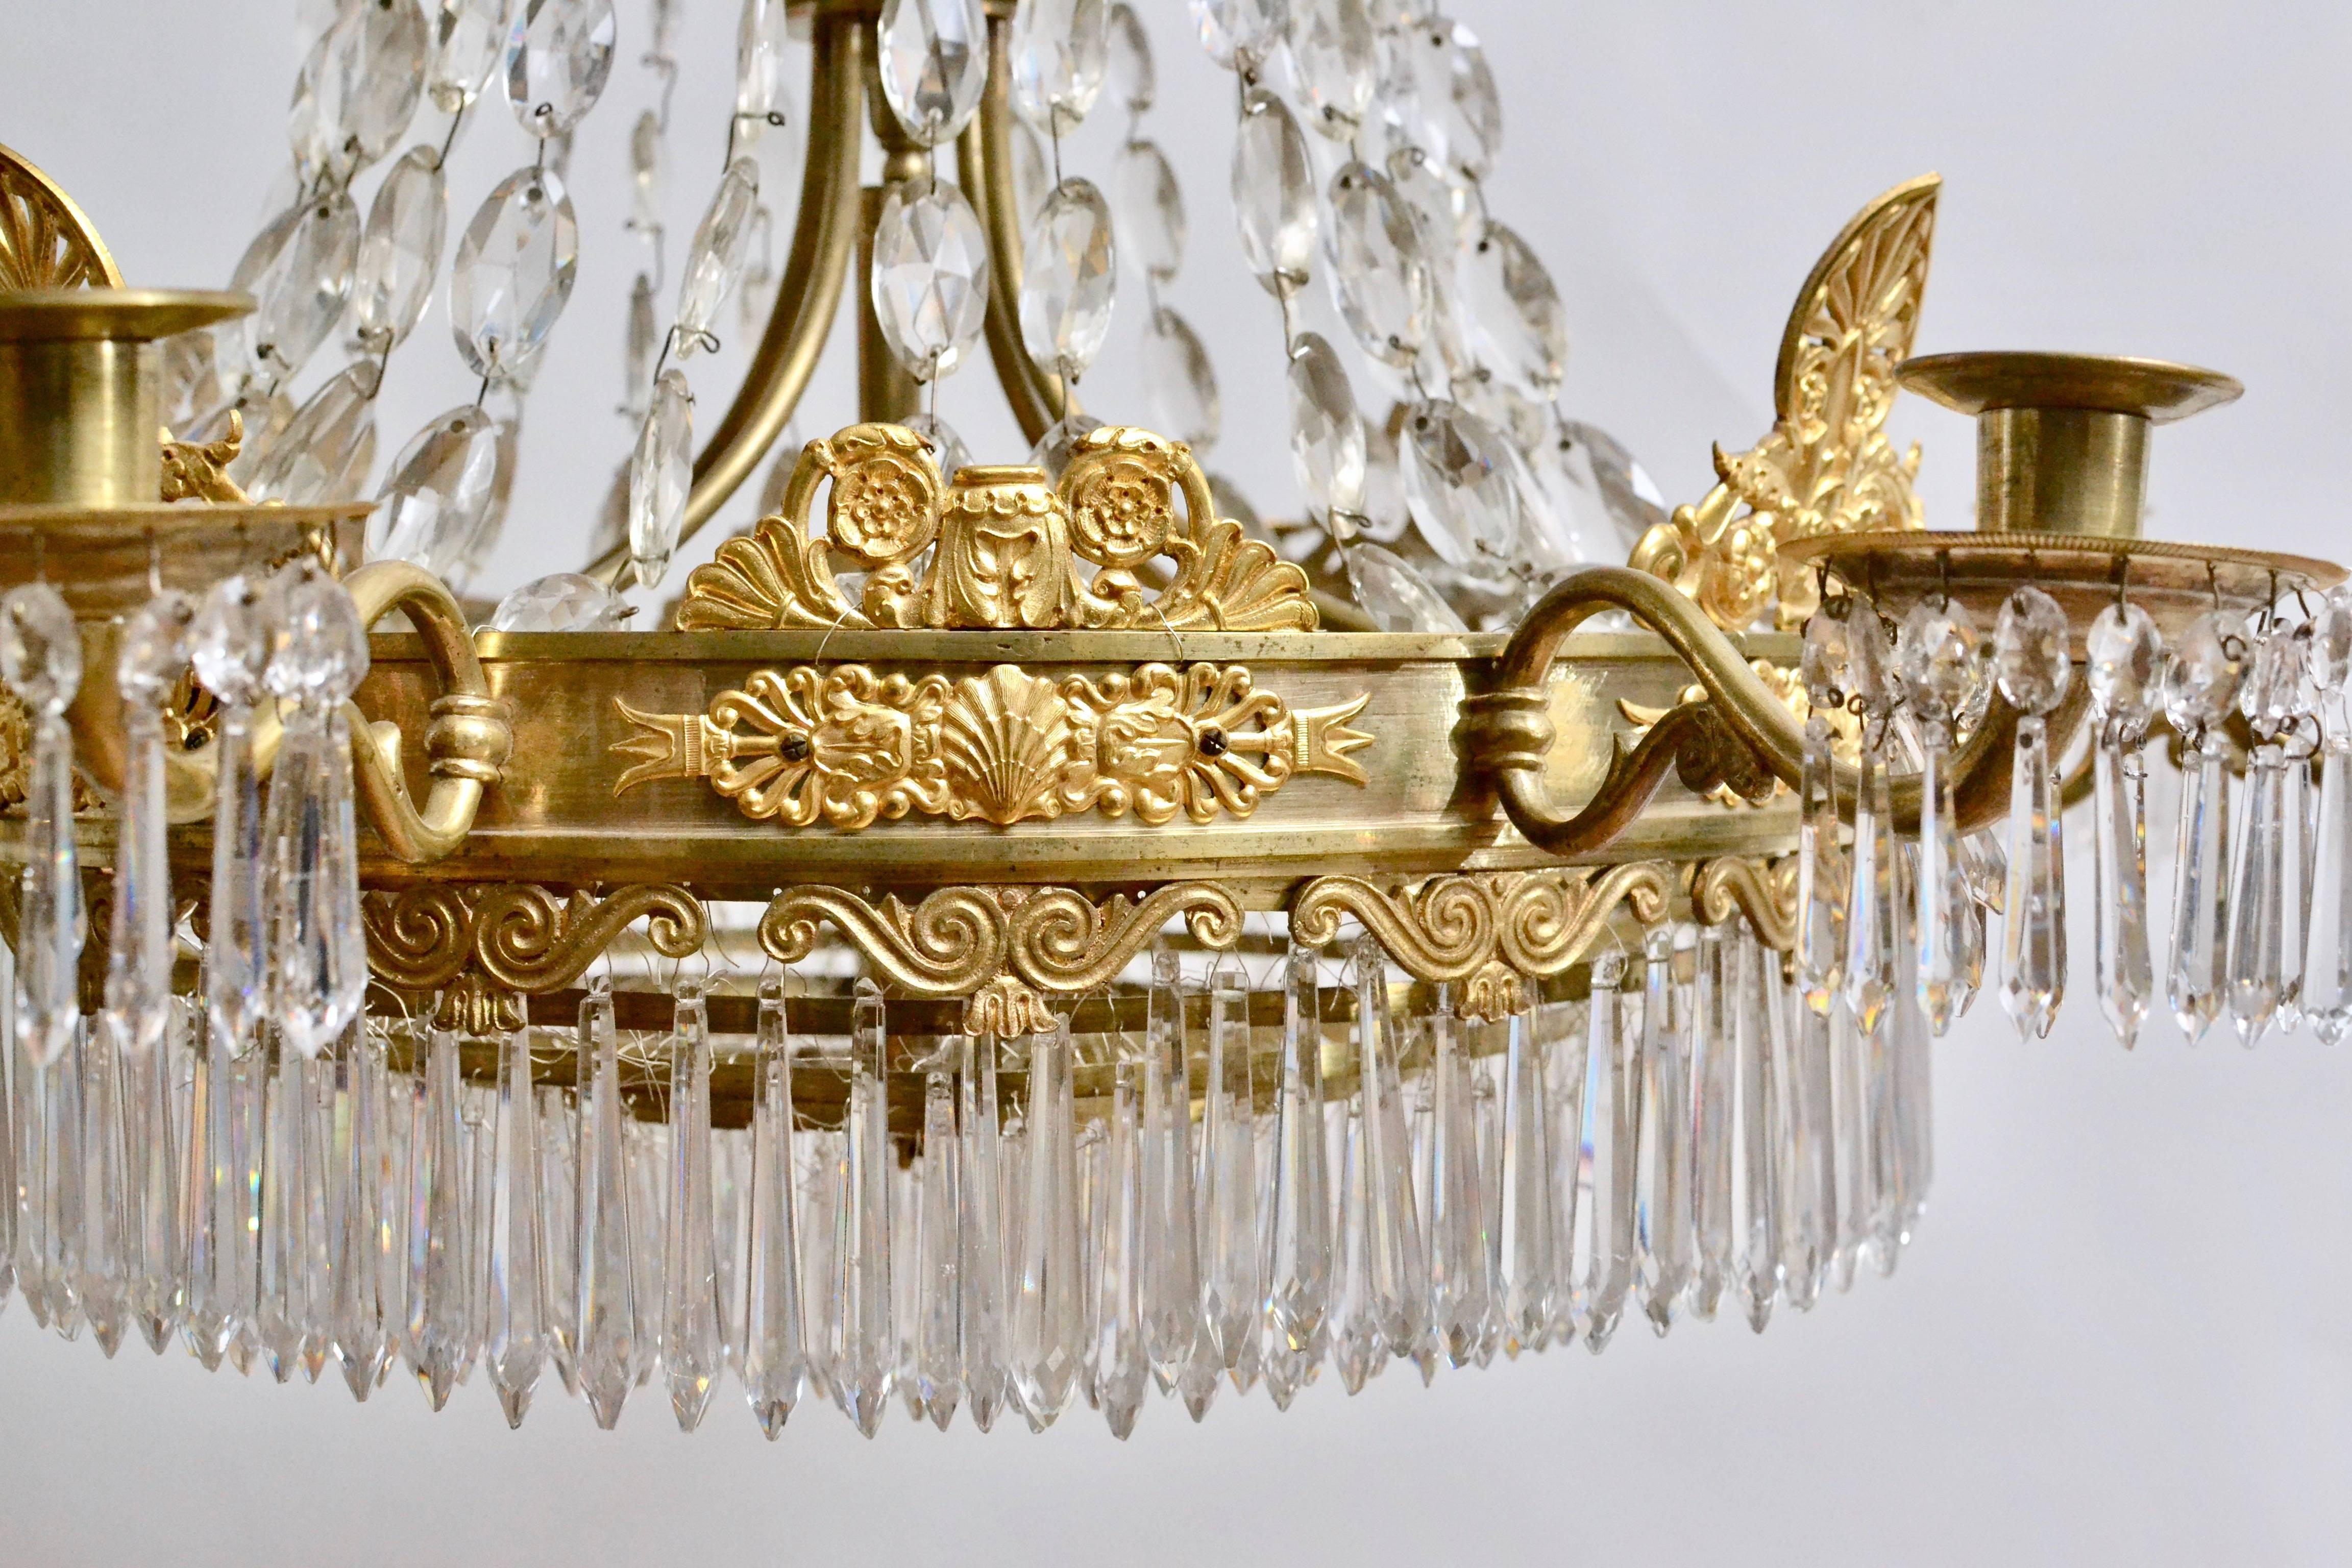 A French Empire gilt bronze and crystal chandelier, circa 1825. Signed SUIREAU A PARIS.